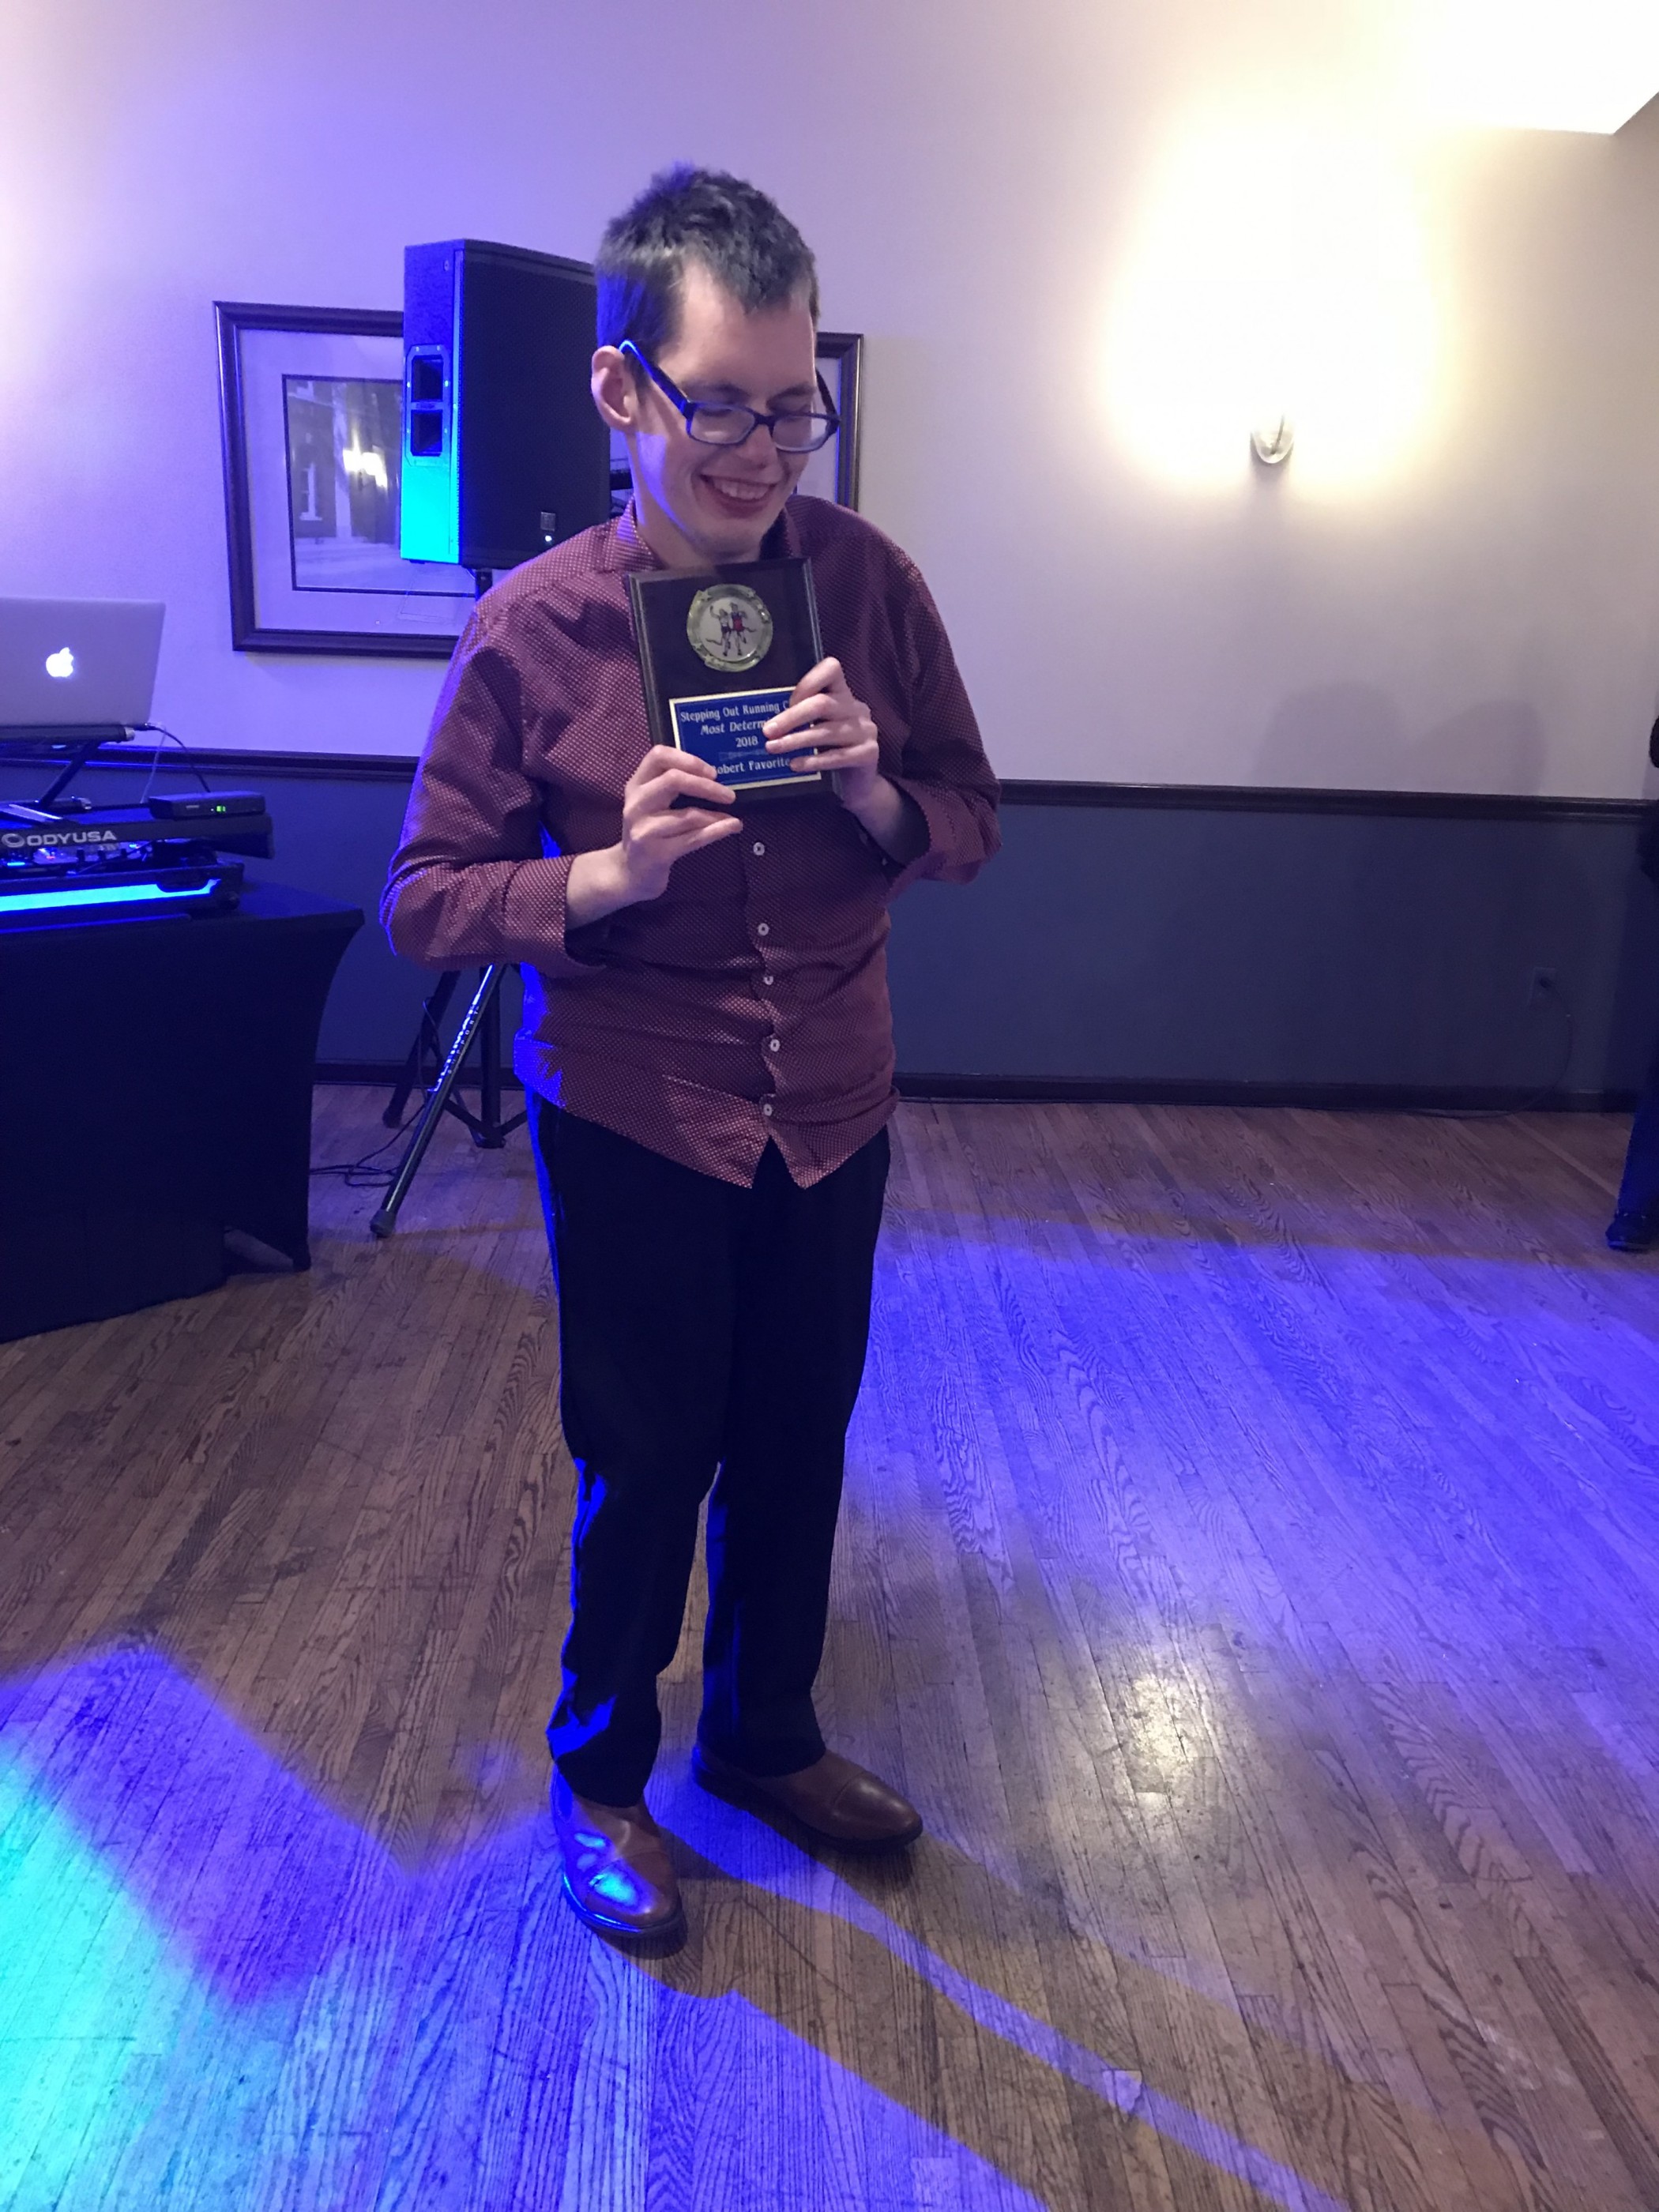 Robert Favorite with an award from stepping out